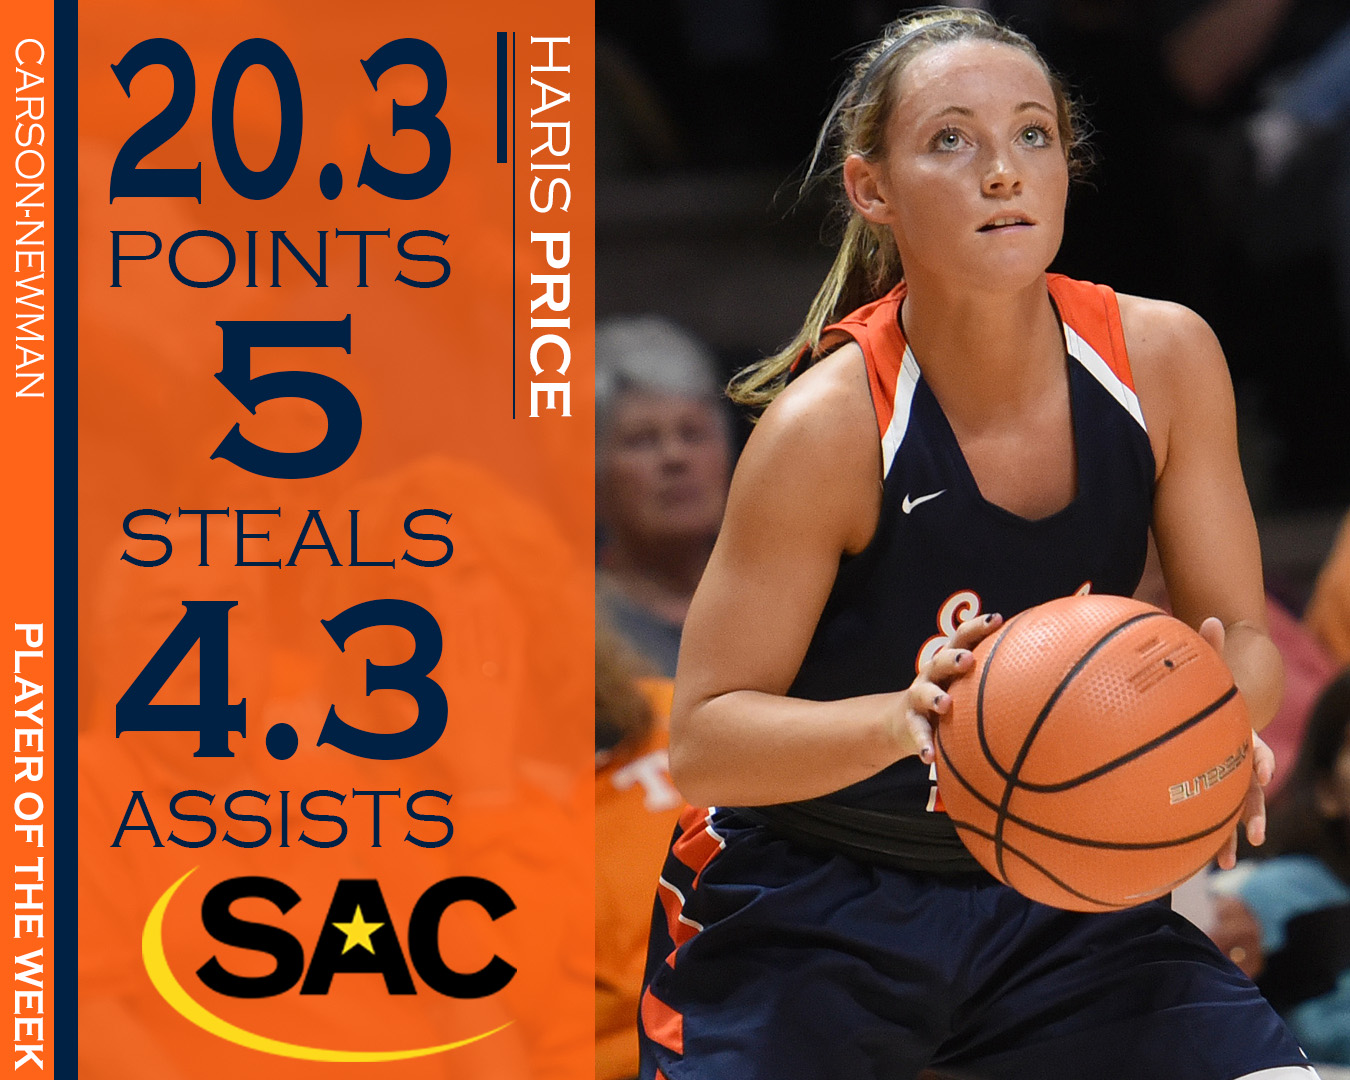 Pilfering Price collects SAC Player of the Week plaudit